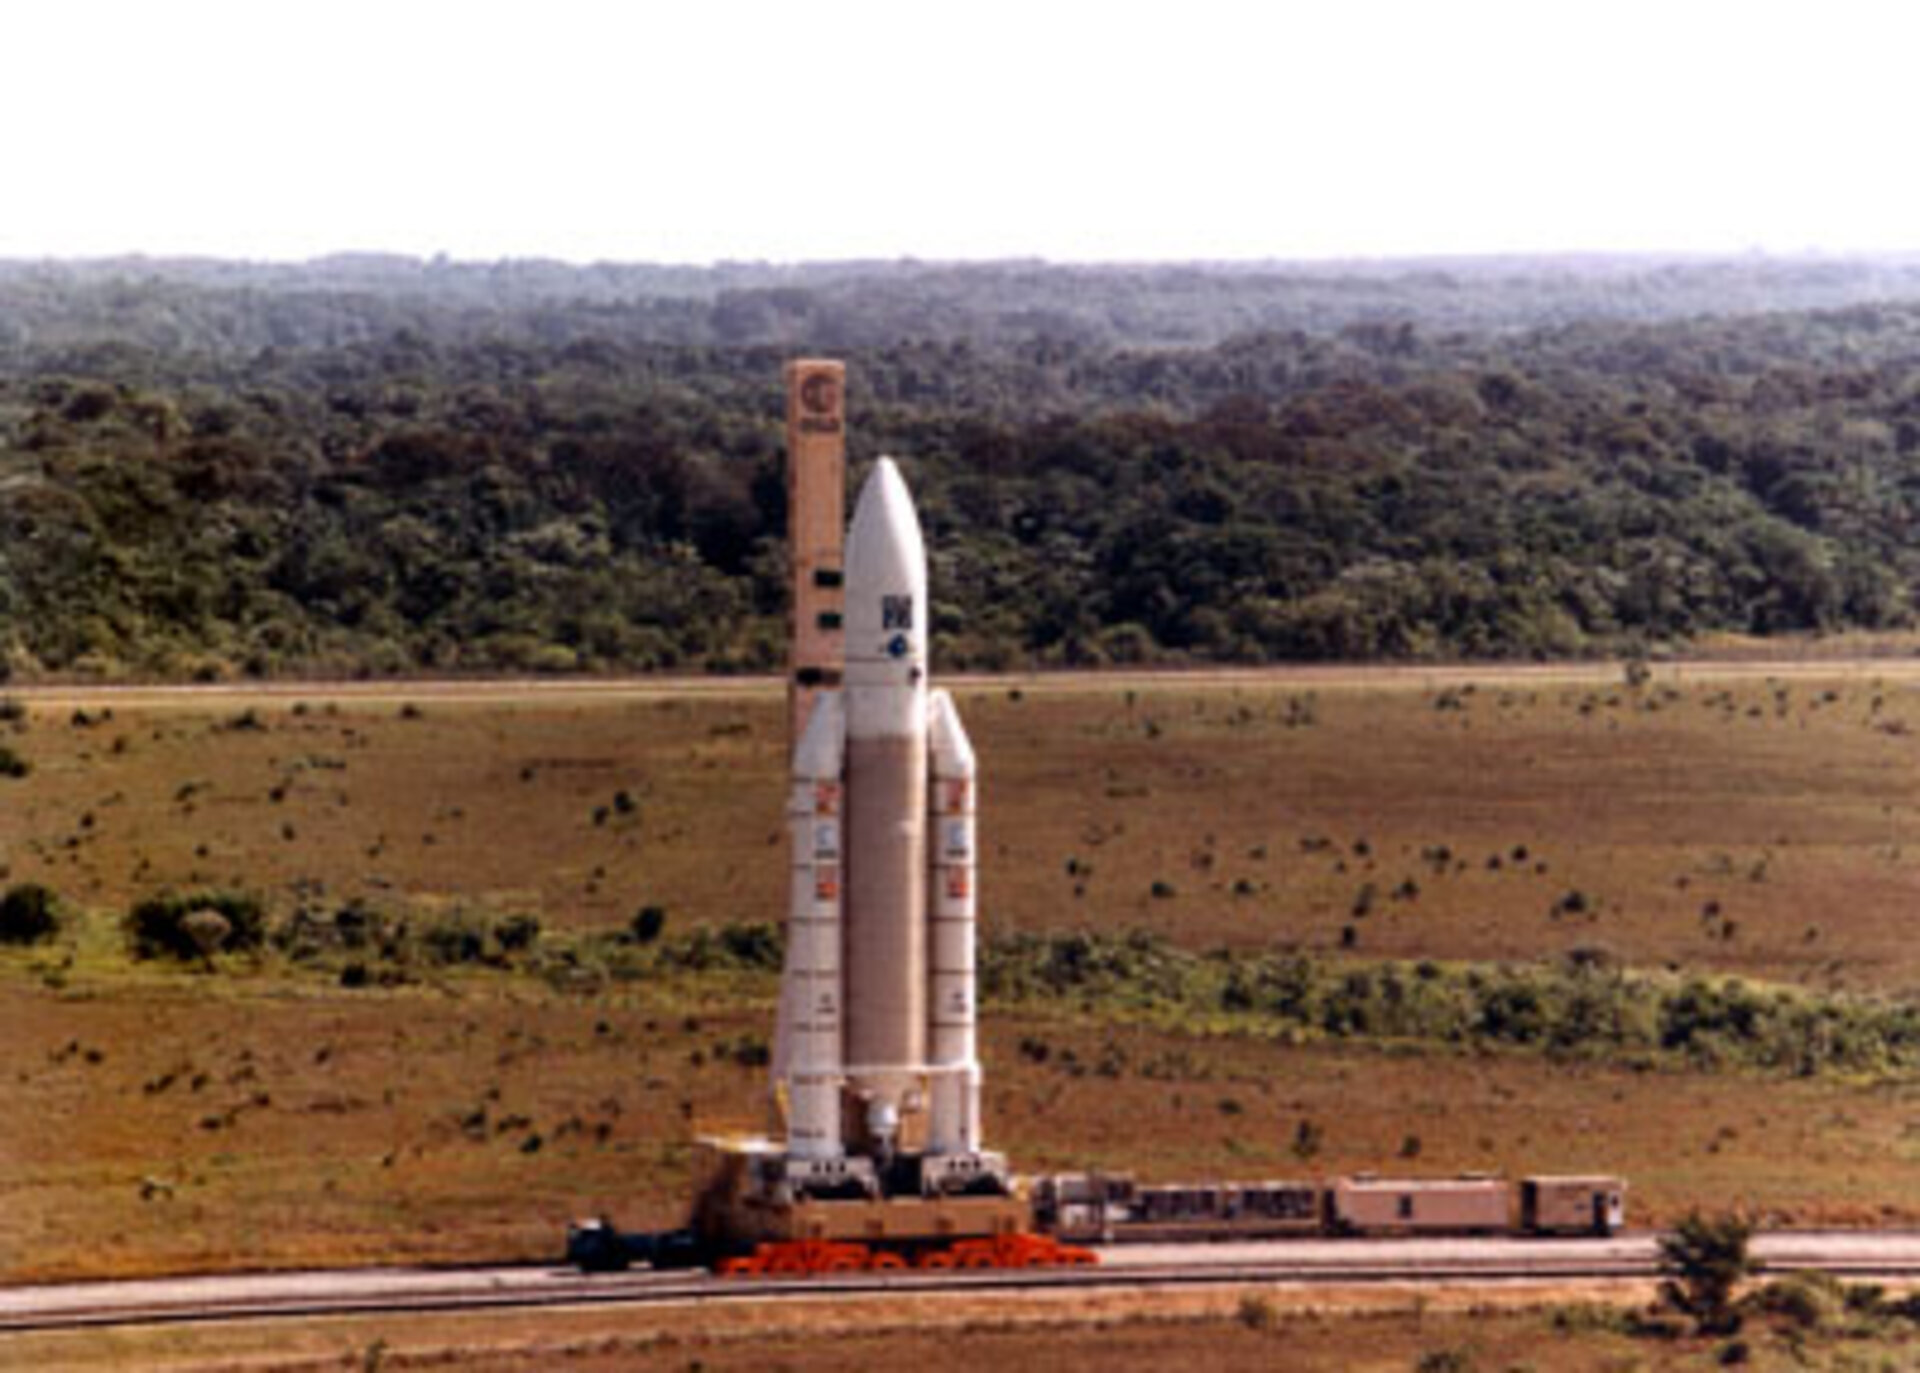 Ariane launcher and launch table